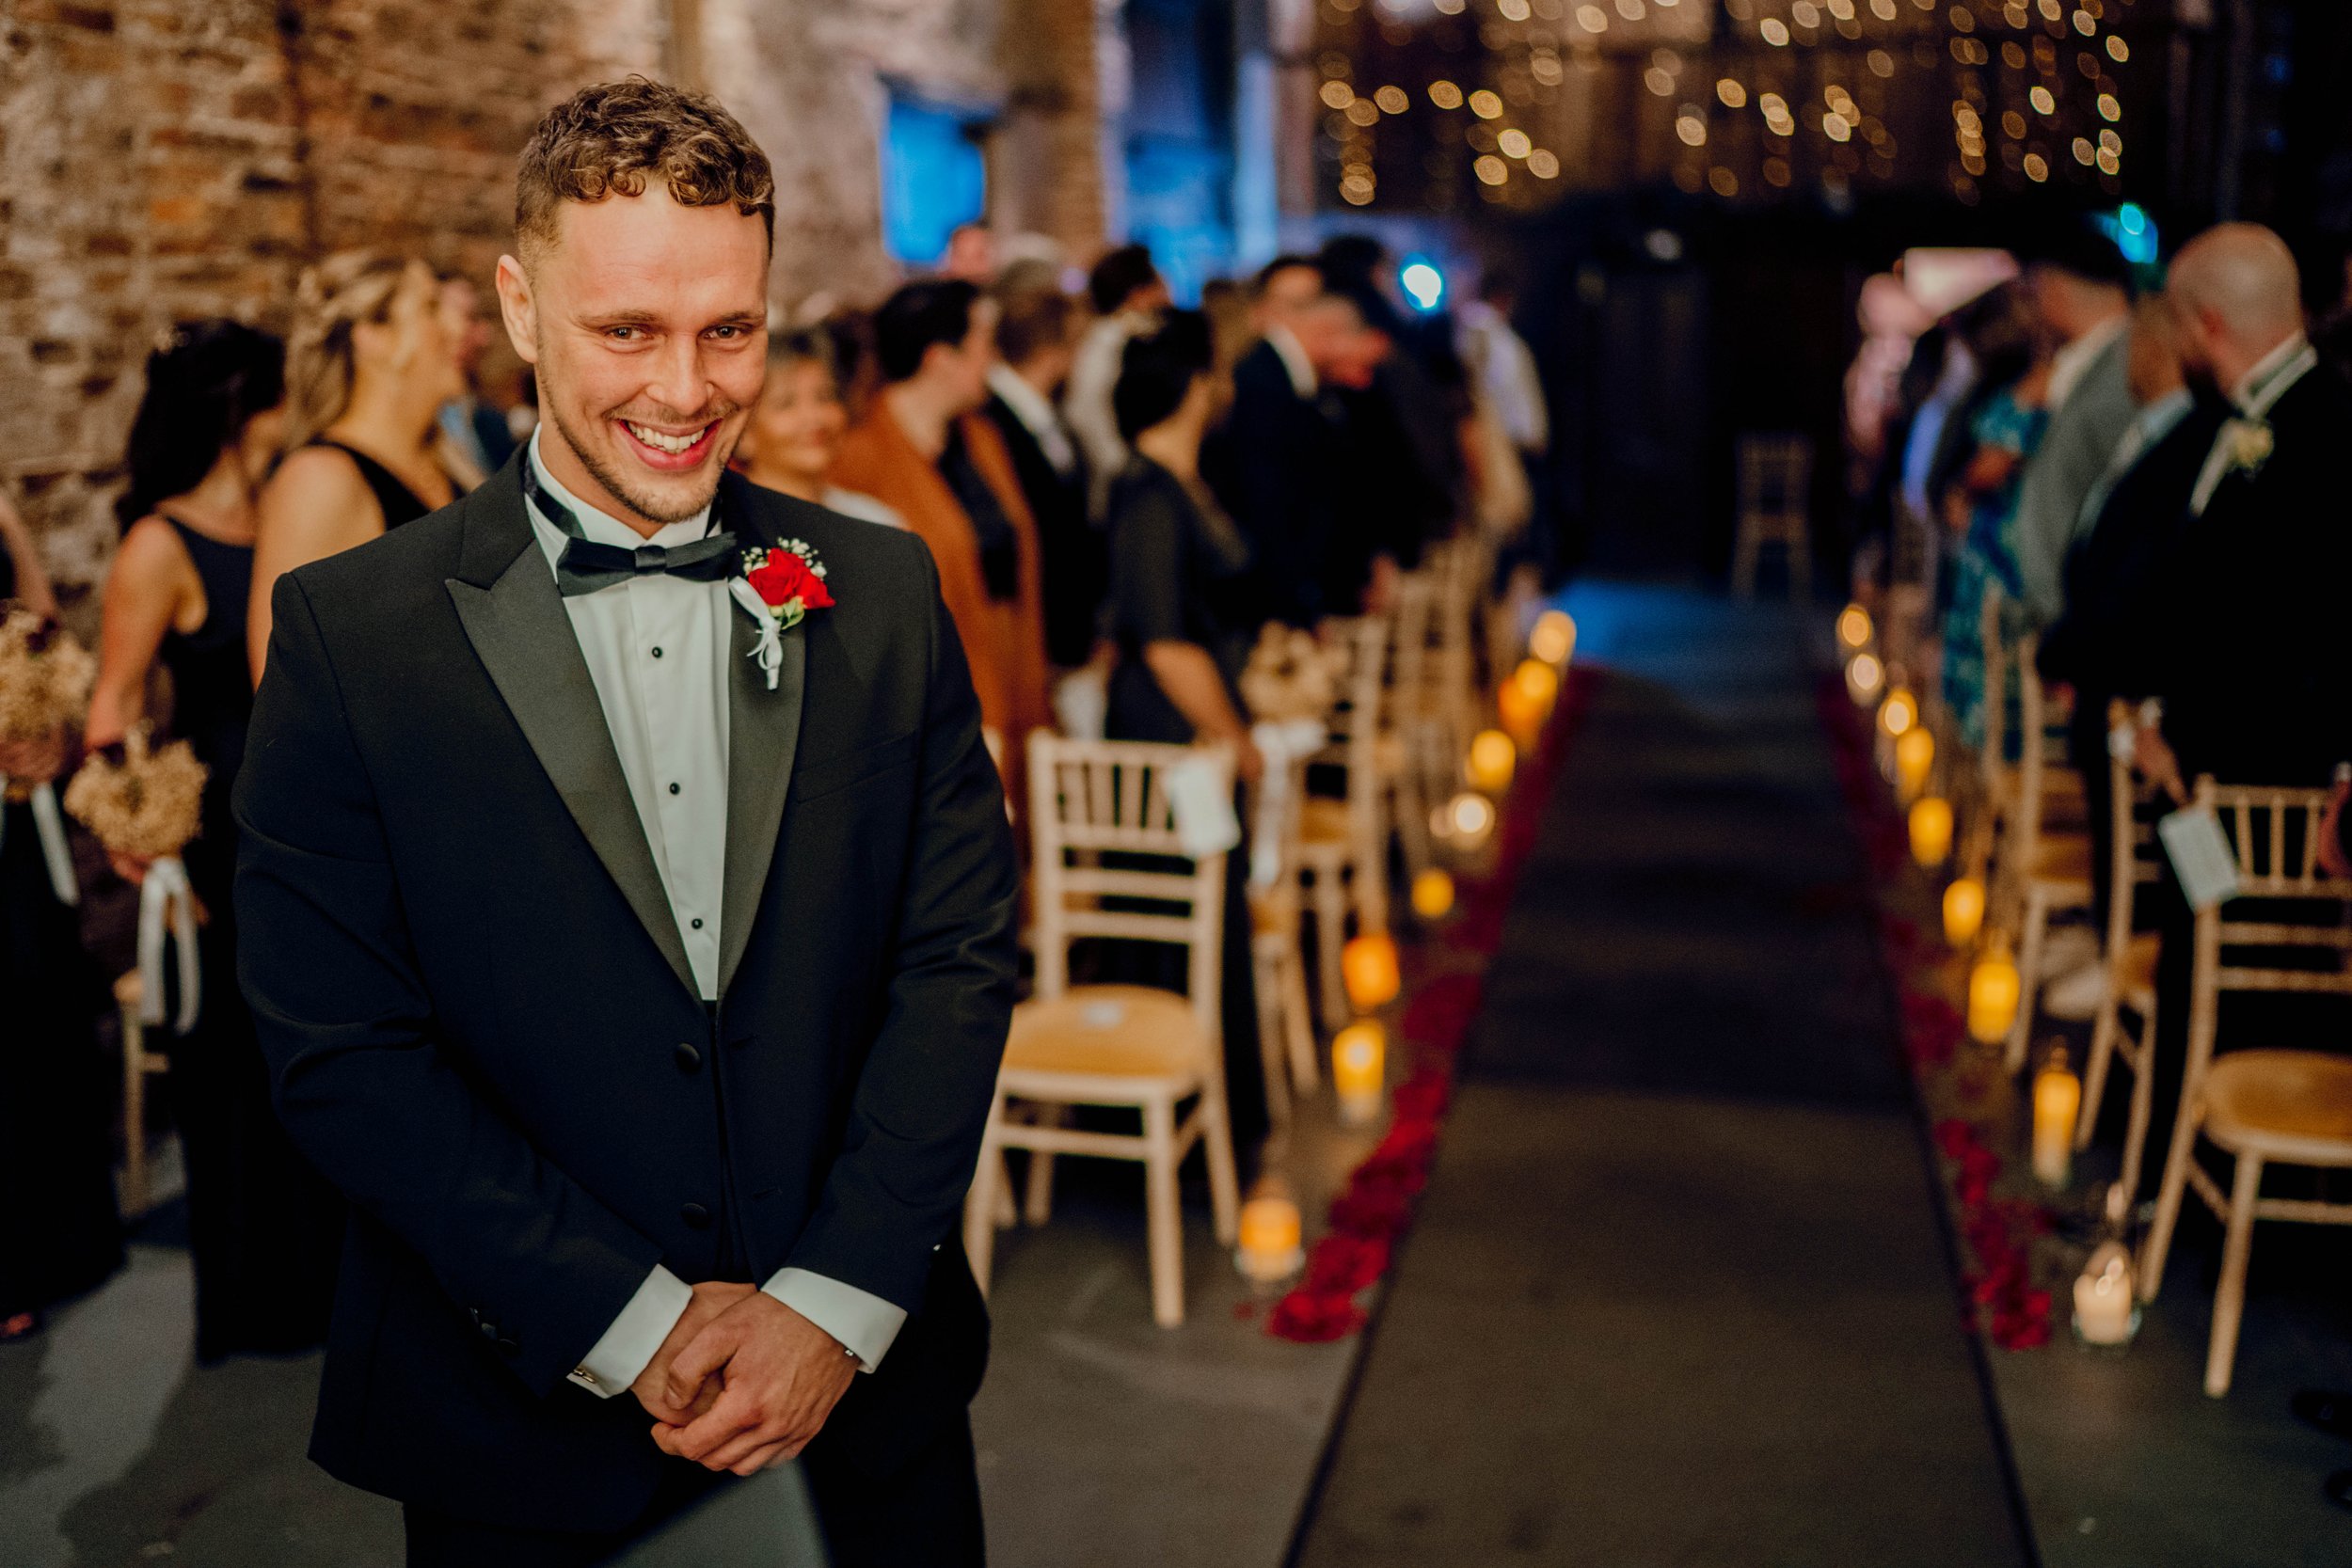 03_Groom awaits entrance of bride in The Normans wedding venue Ceremony Barn. Photo by Hamish Irvine.jpg